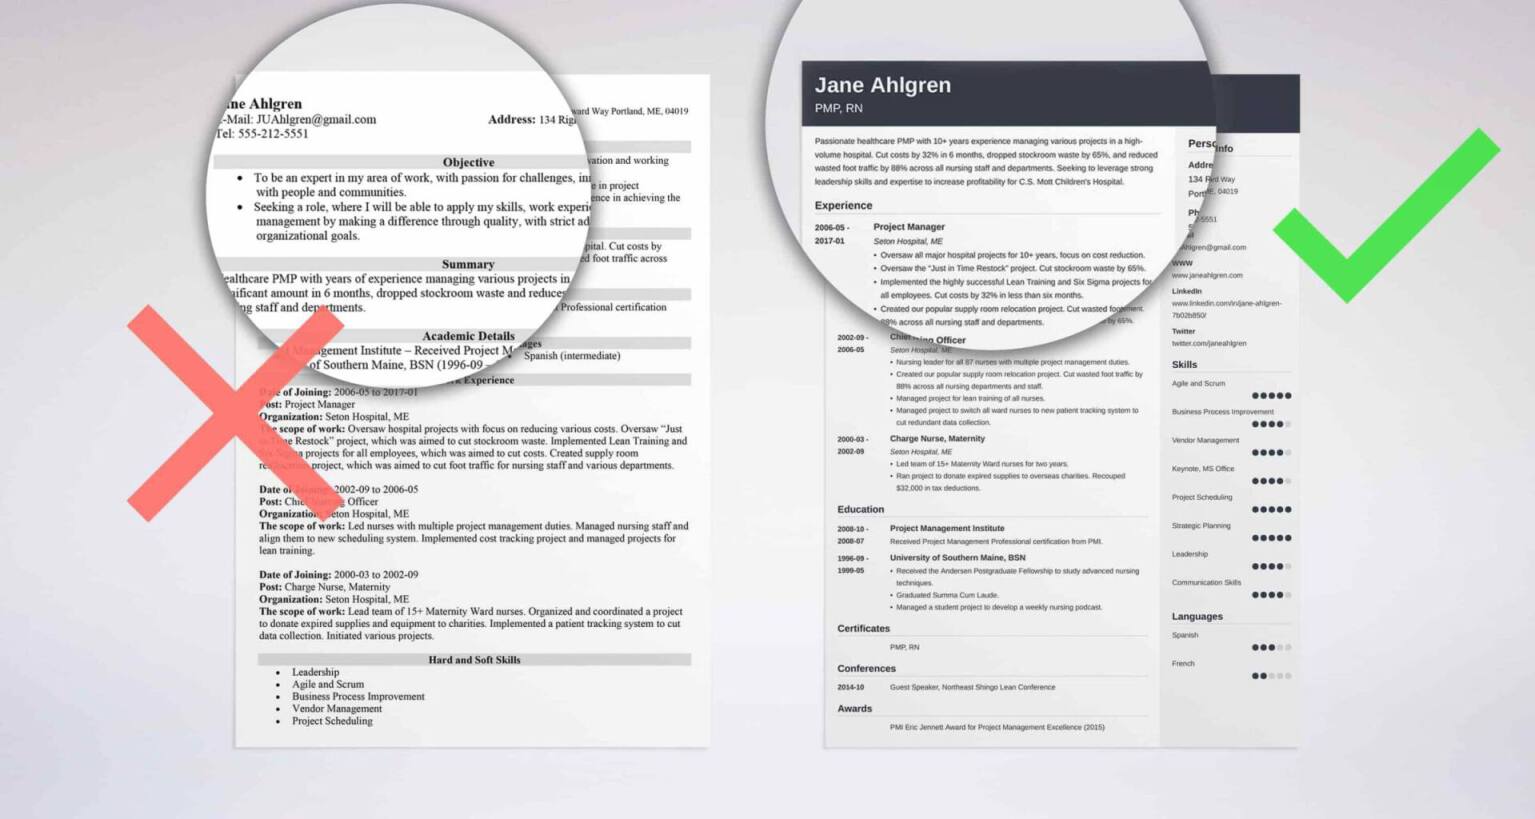 Resume overview examples - myteboard